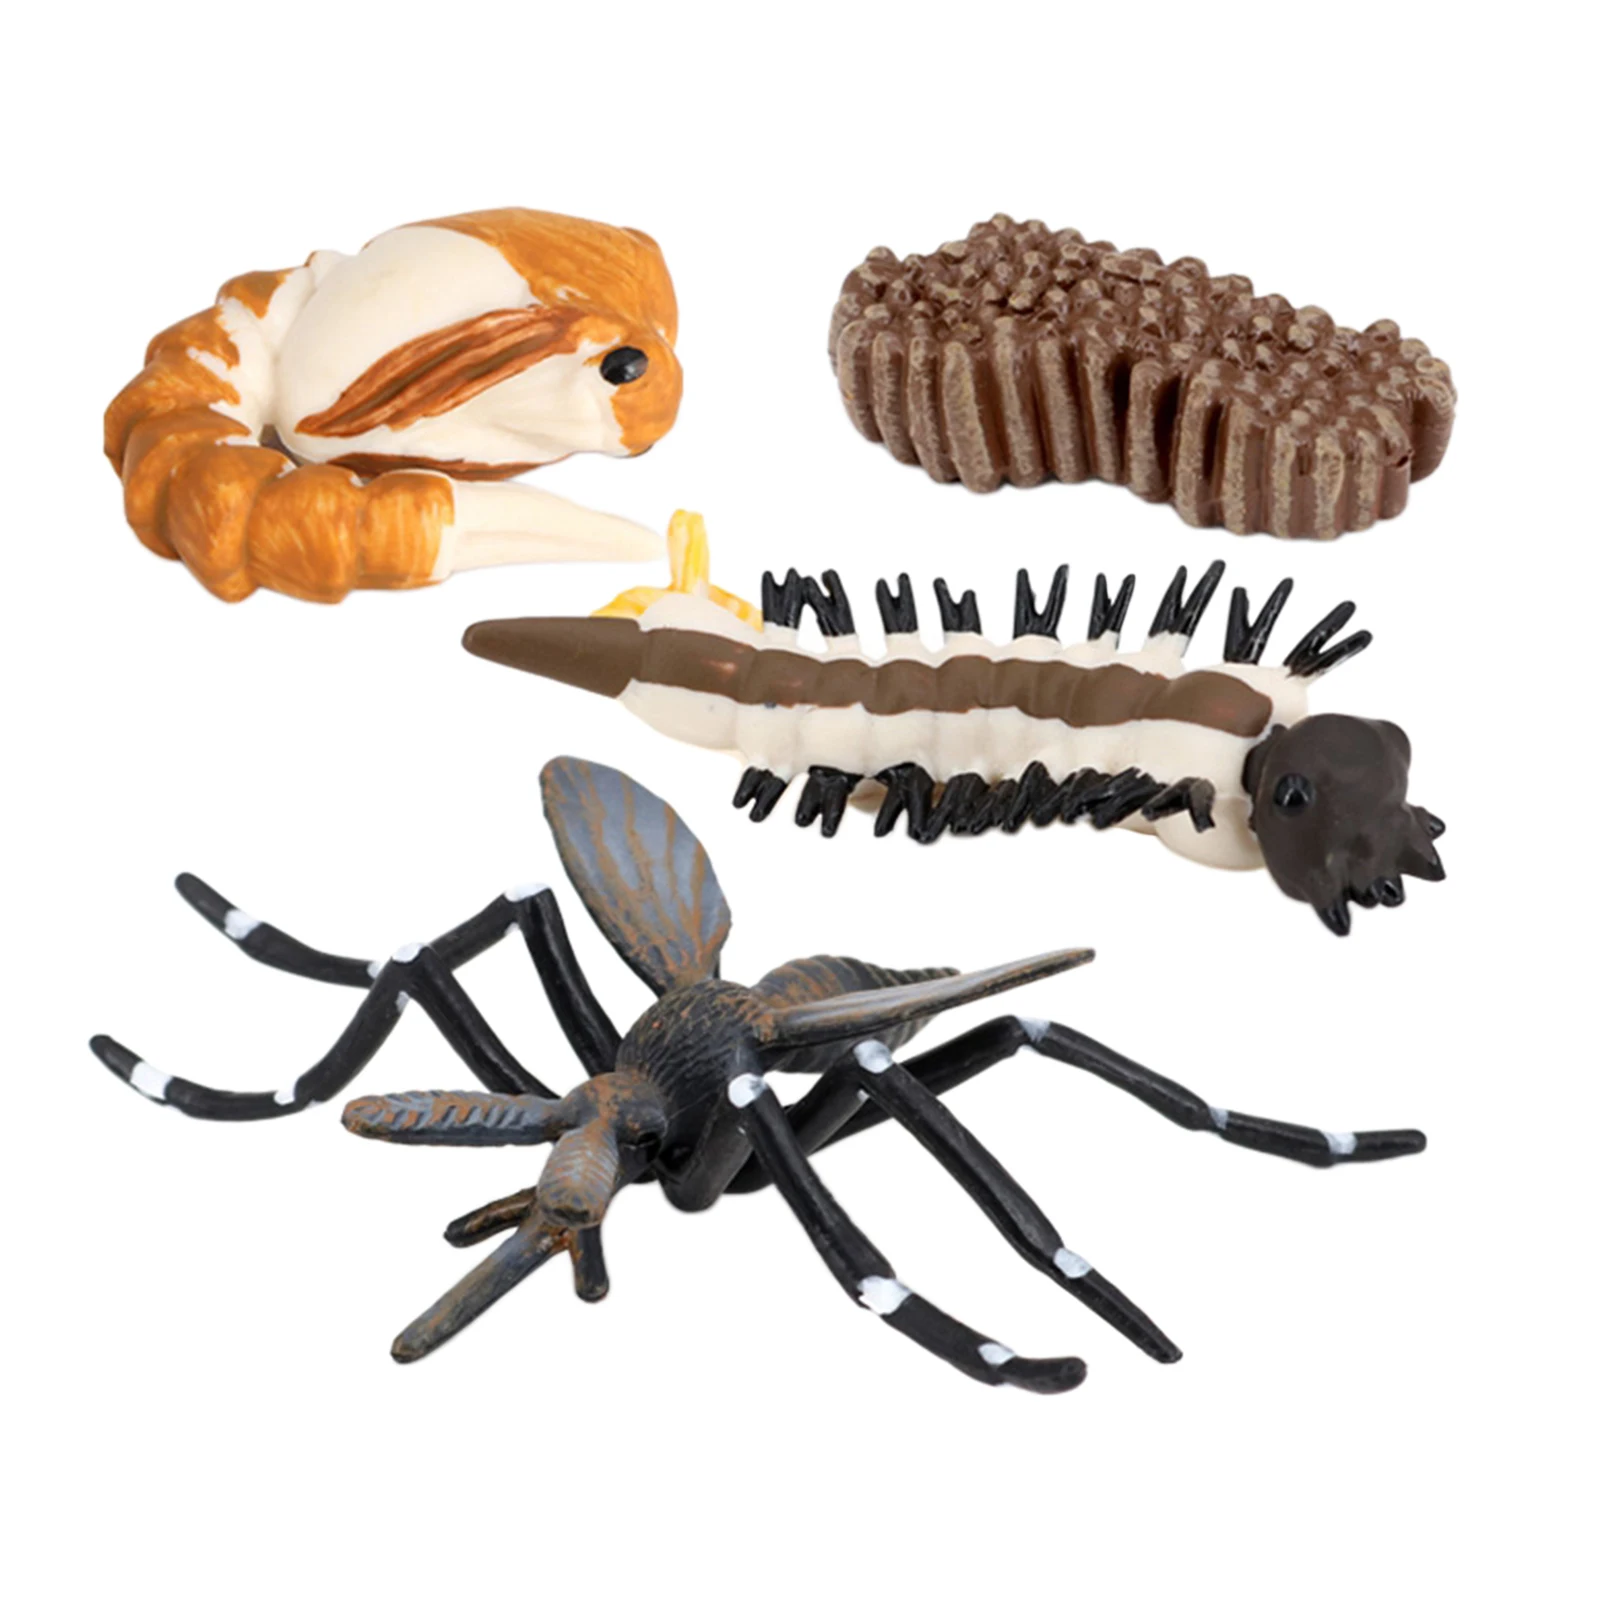 Insect World 21 pcs Bugs Animals Children's Toy Nature 